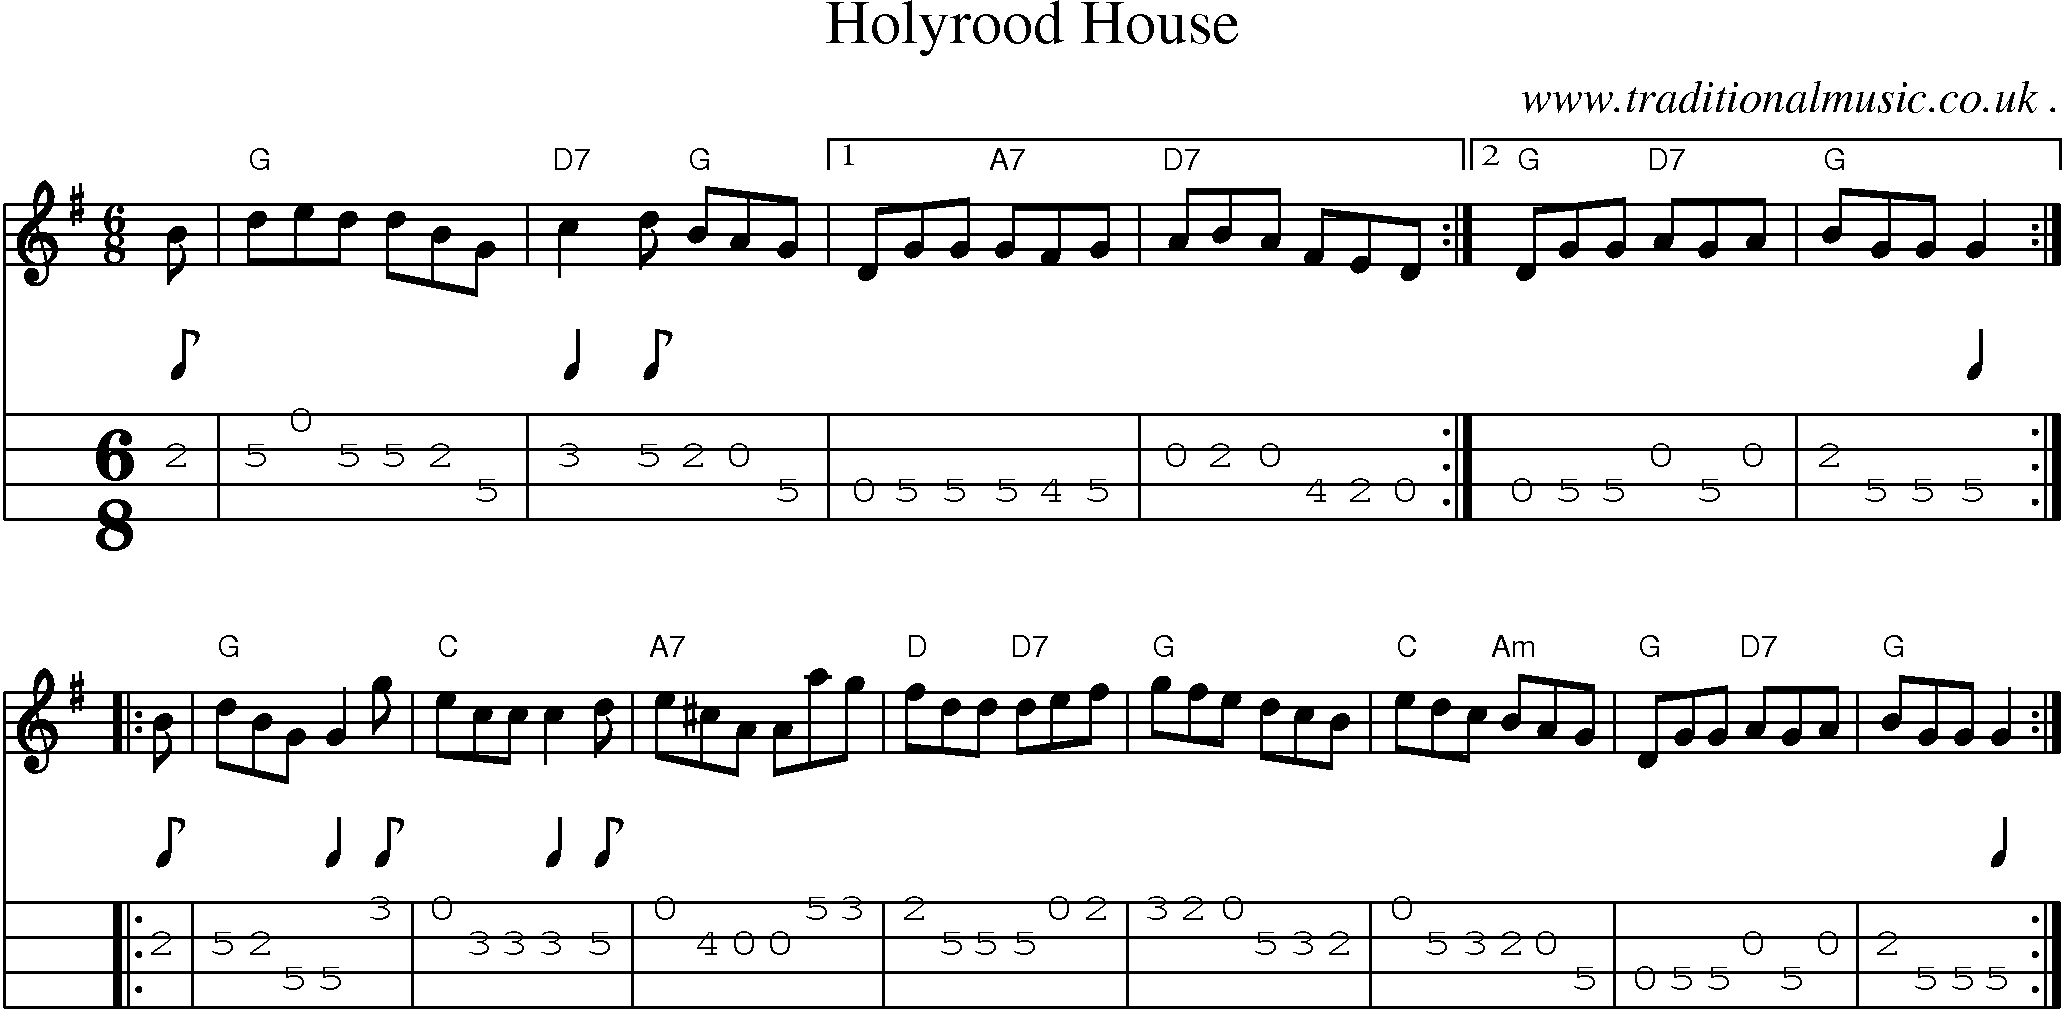 Sheet-music  score, Chords and Mandolin Tabs for Holyrood House